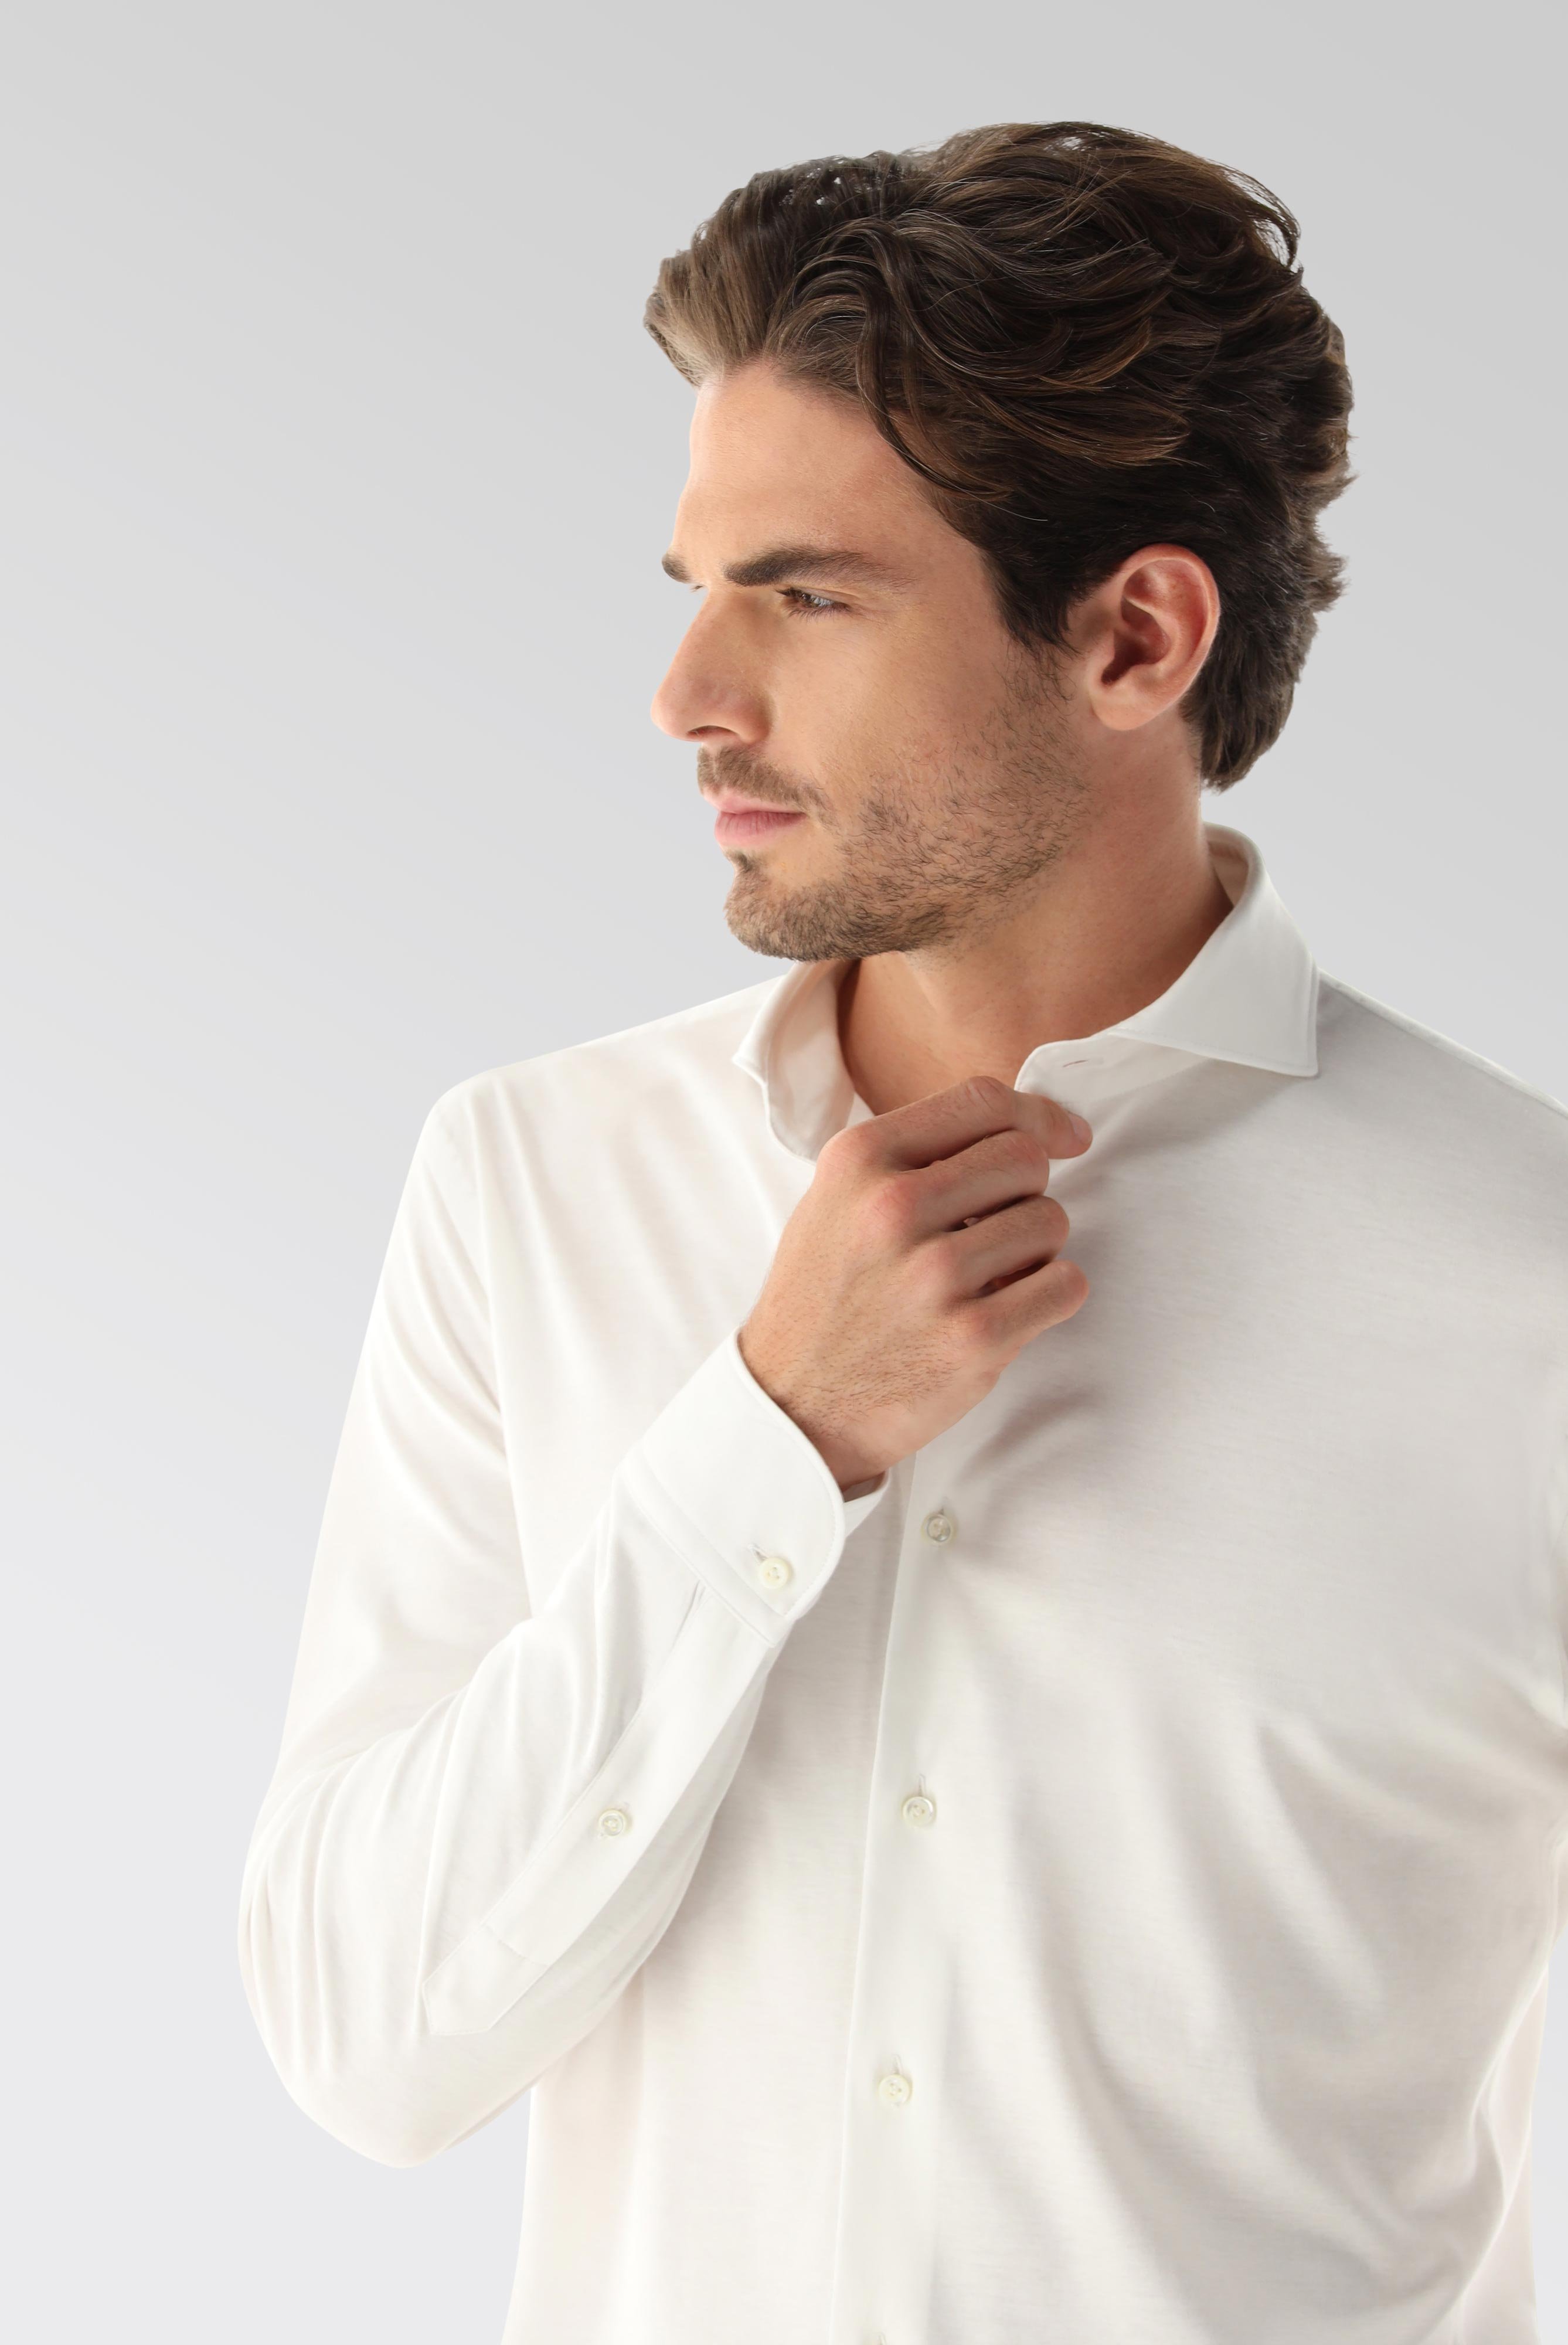 Easy Iron Shirts+Swiss Cotton Jersey Shirt Tailor Fit+20.1683.UC.180031.000.X4L